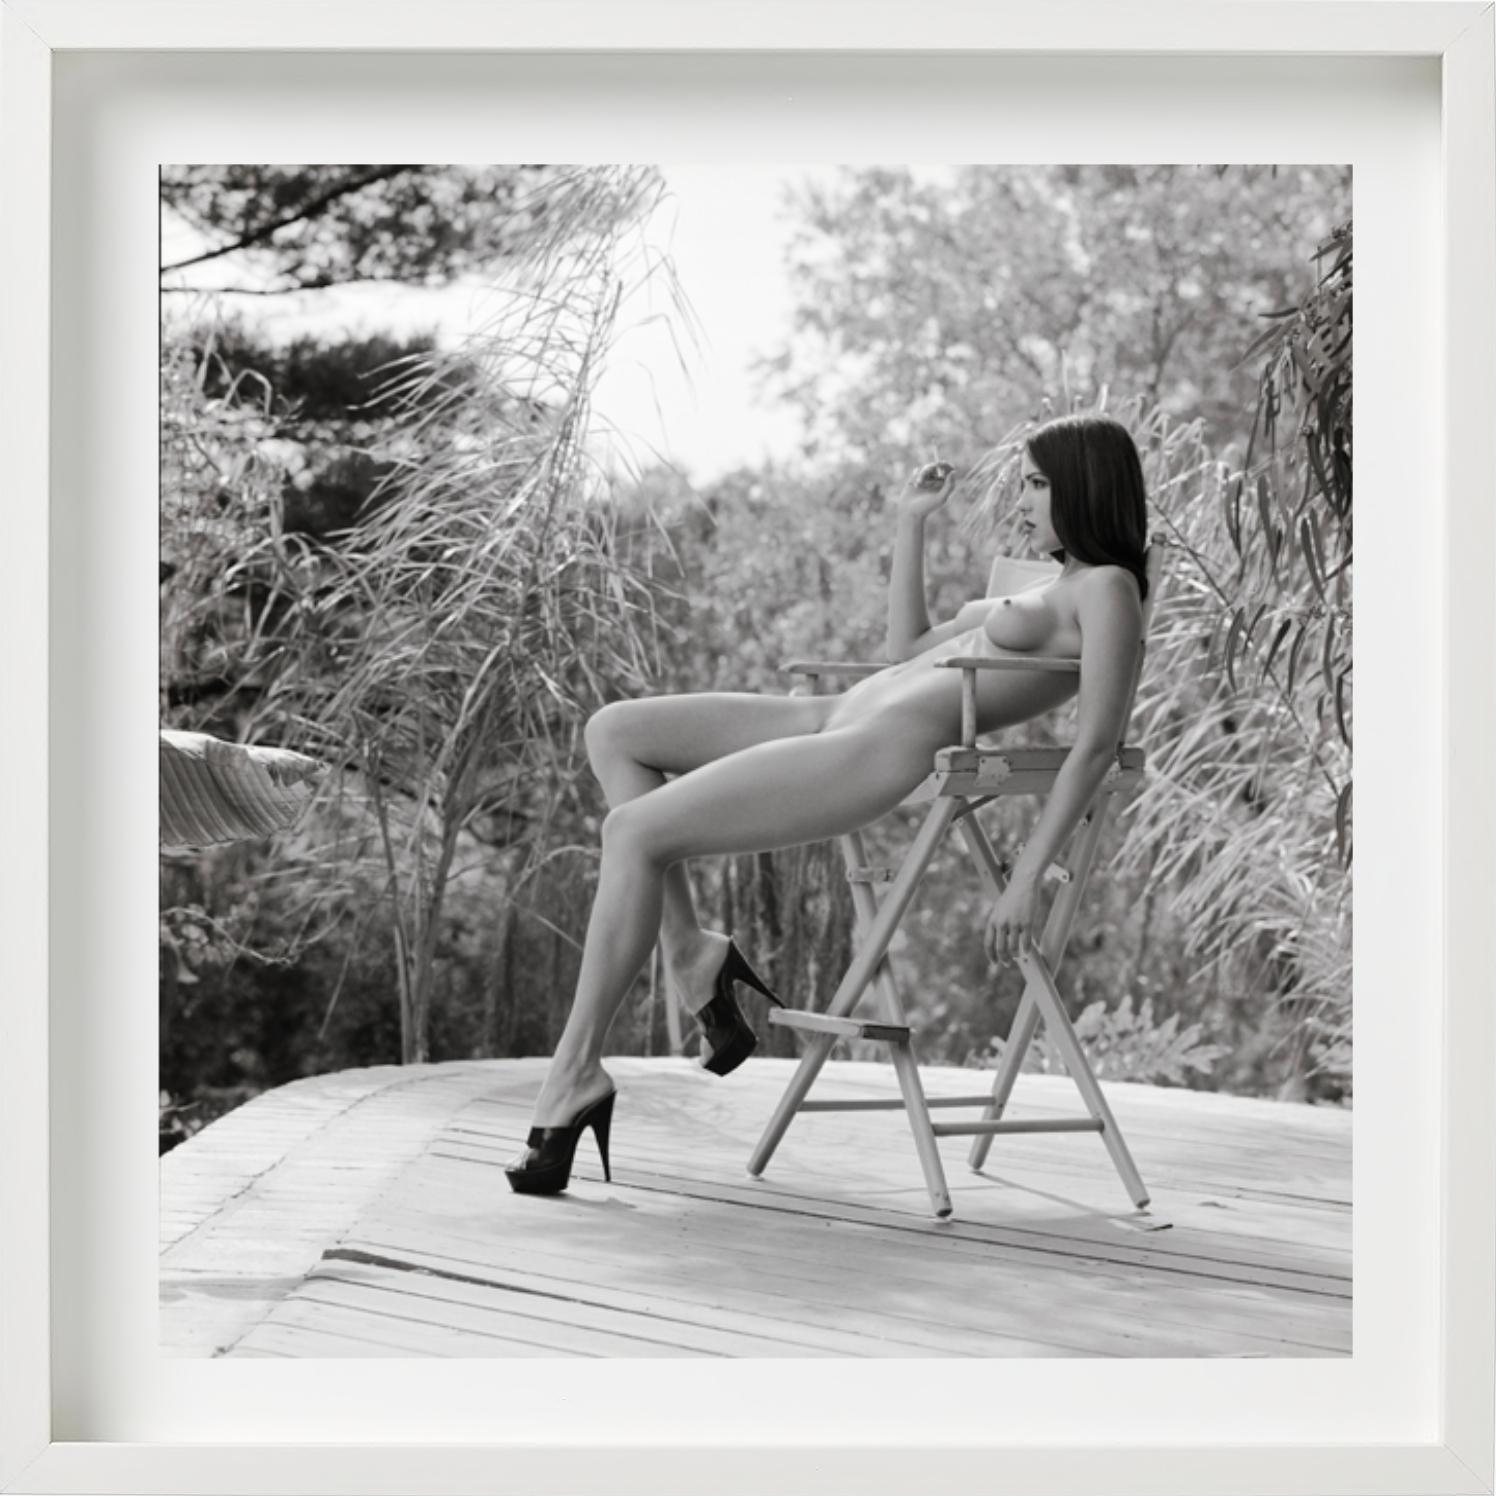 'Faith will allow you to grow '- nude in Garden, fine art photography, 1996 - Contemporary Photograph by Guido Argentini